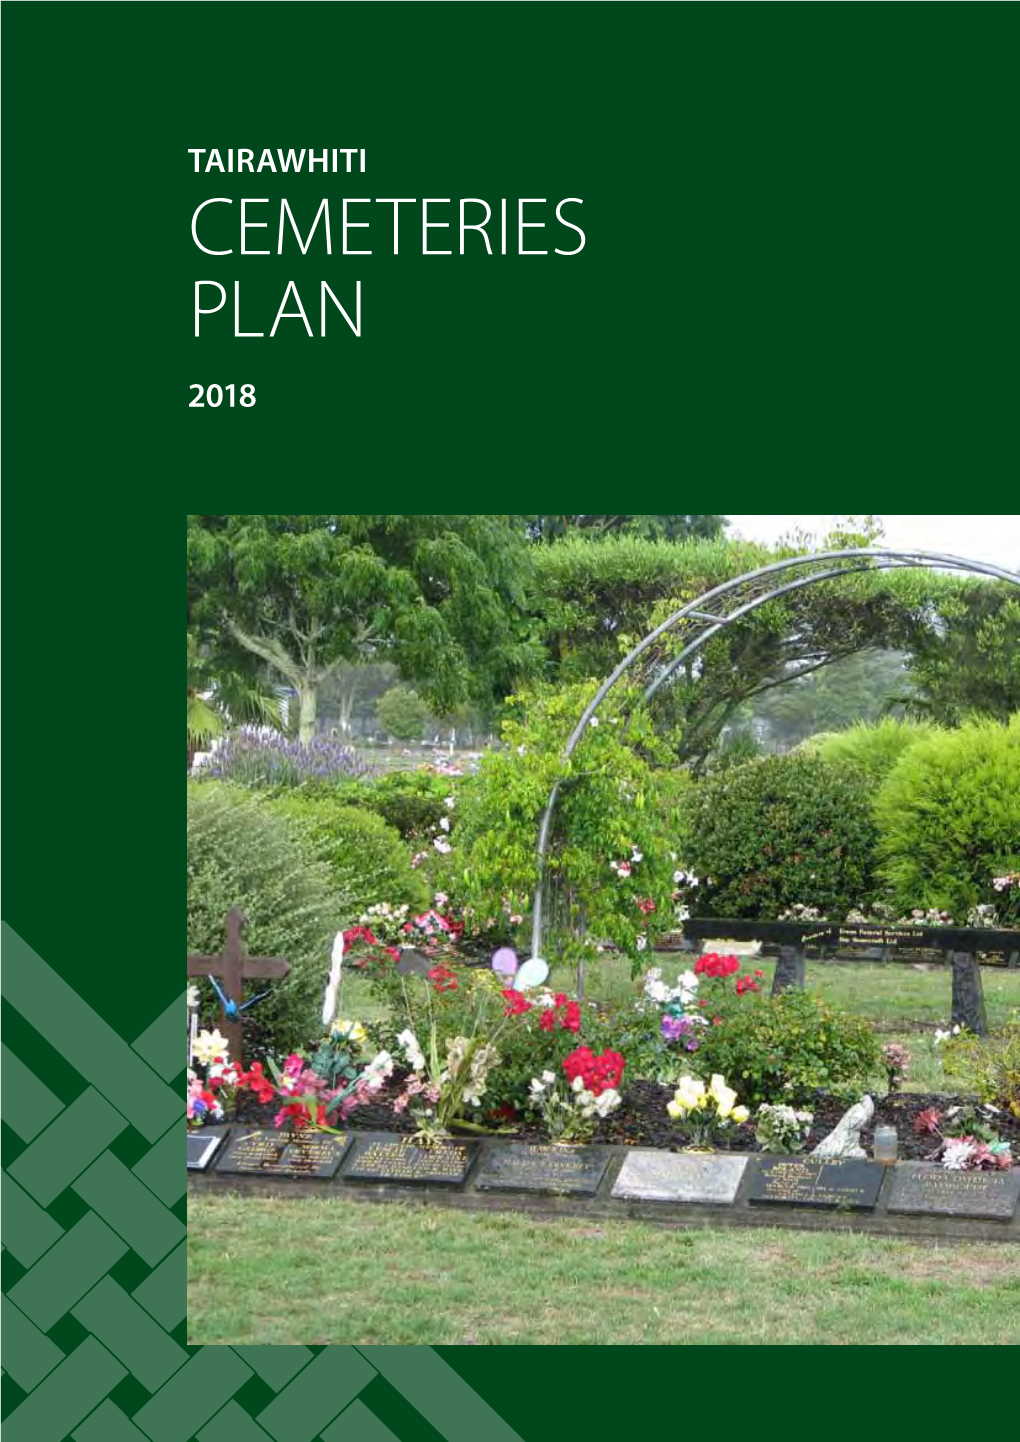 CEMETERIES Plan 2018 ACKNOWLEDGEMENTS the Cemeteries Plan Is One of a Suite of Plans Prepared Under the Tairawhiti Community Facilities Strategy